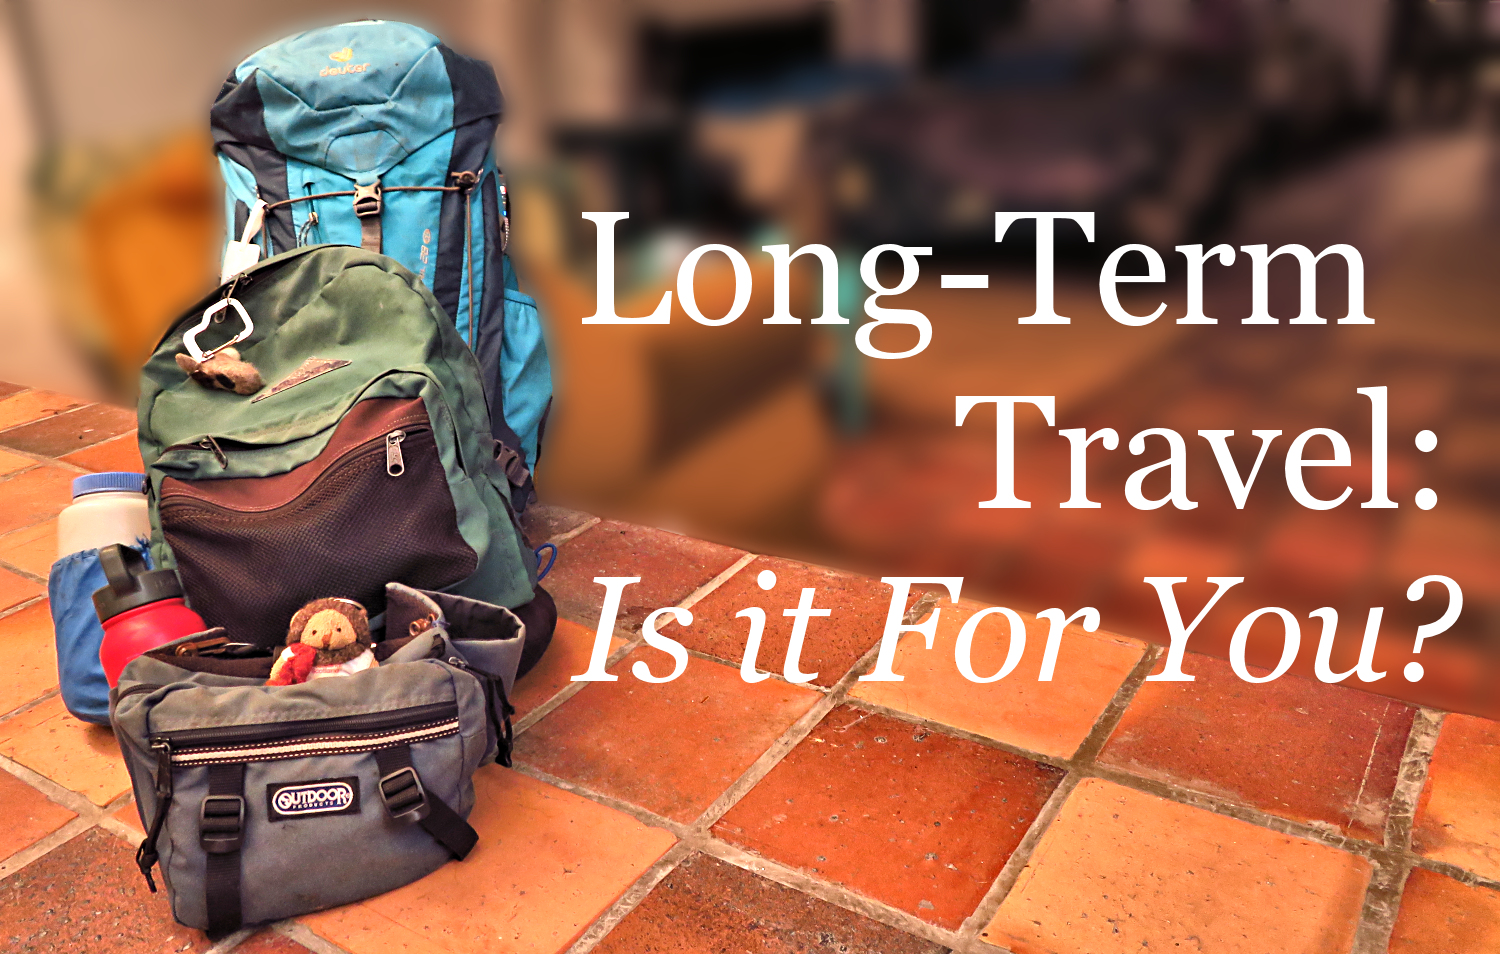 Long Term Travel...Is it for you?